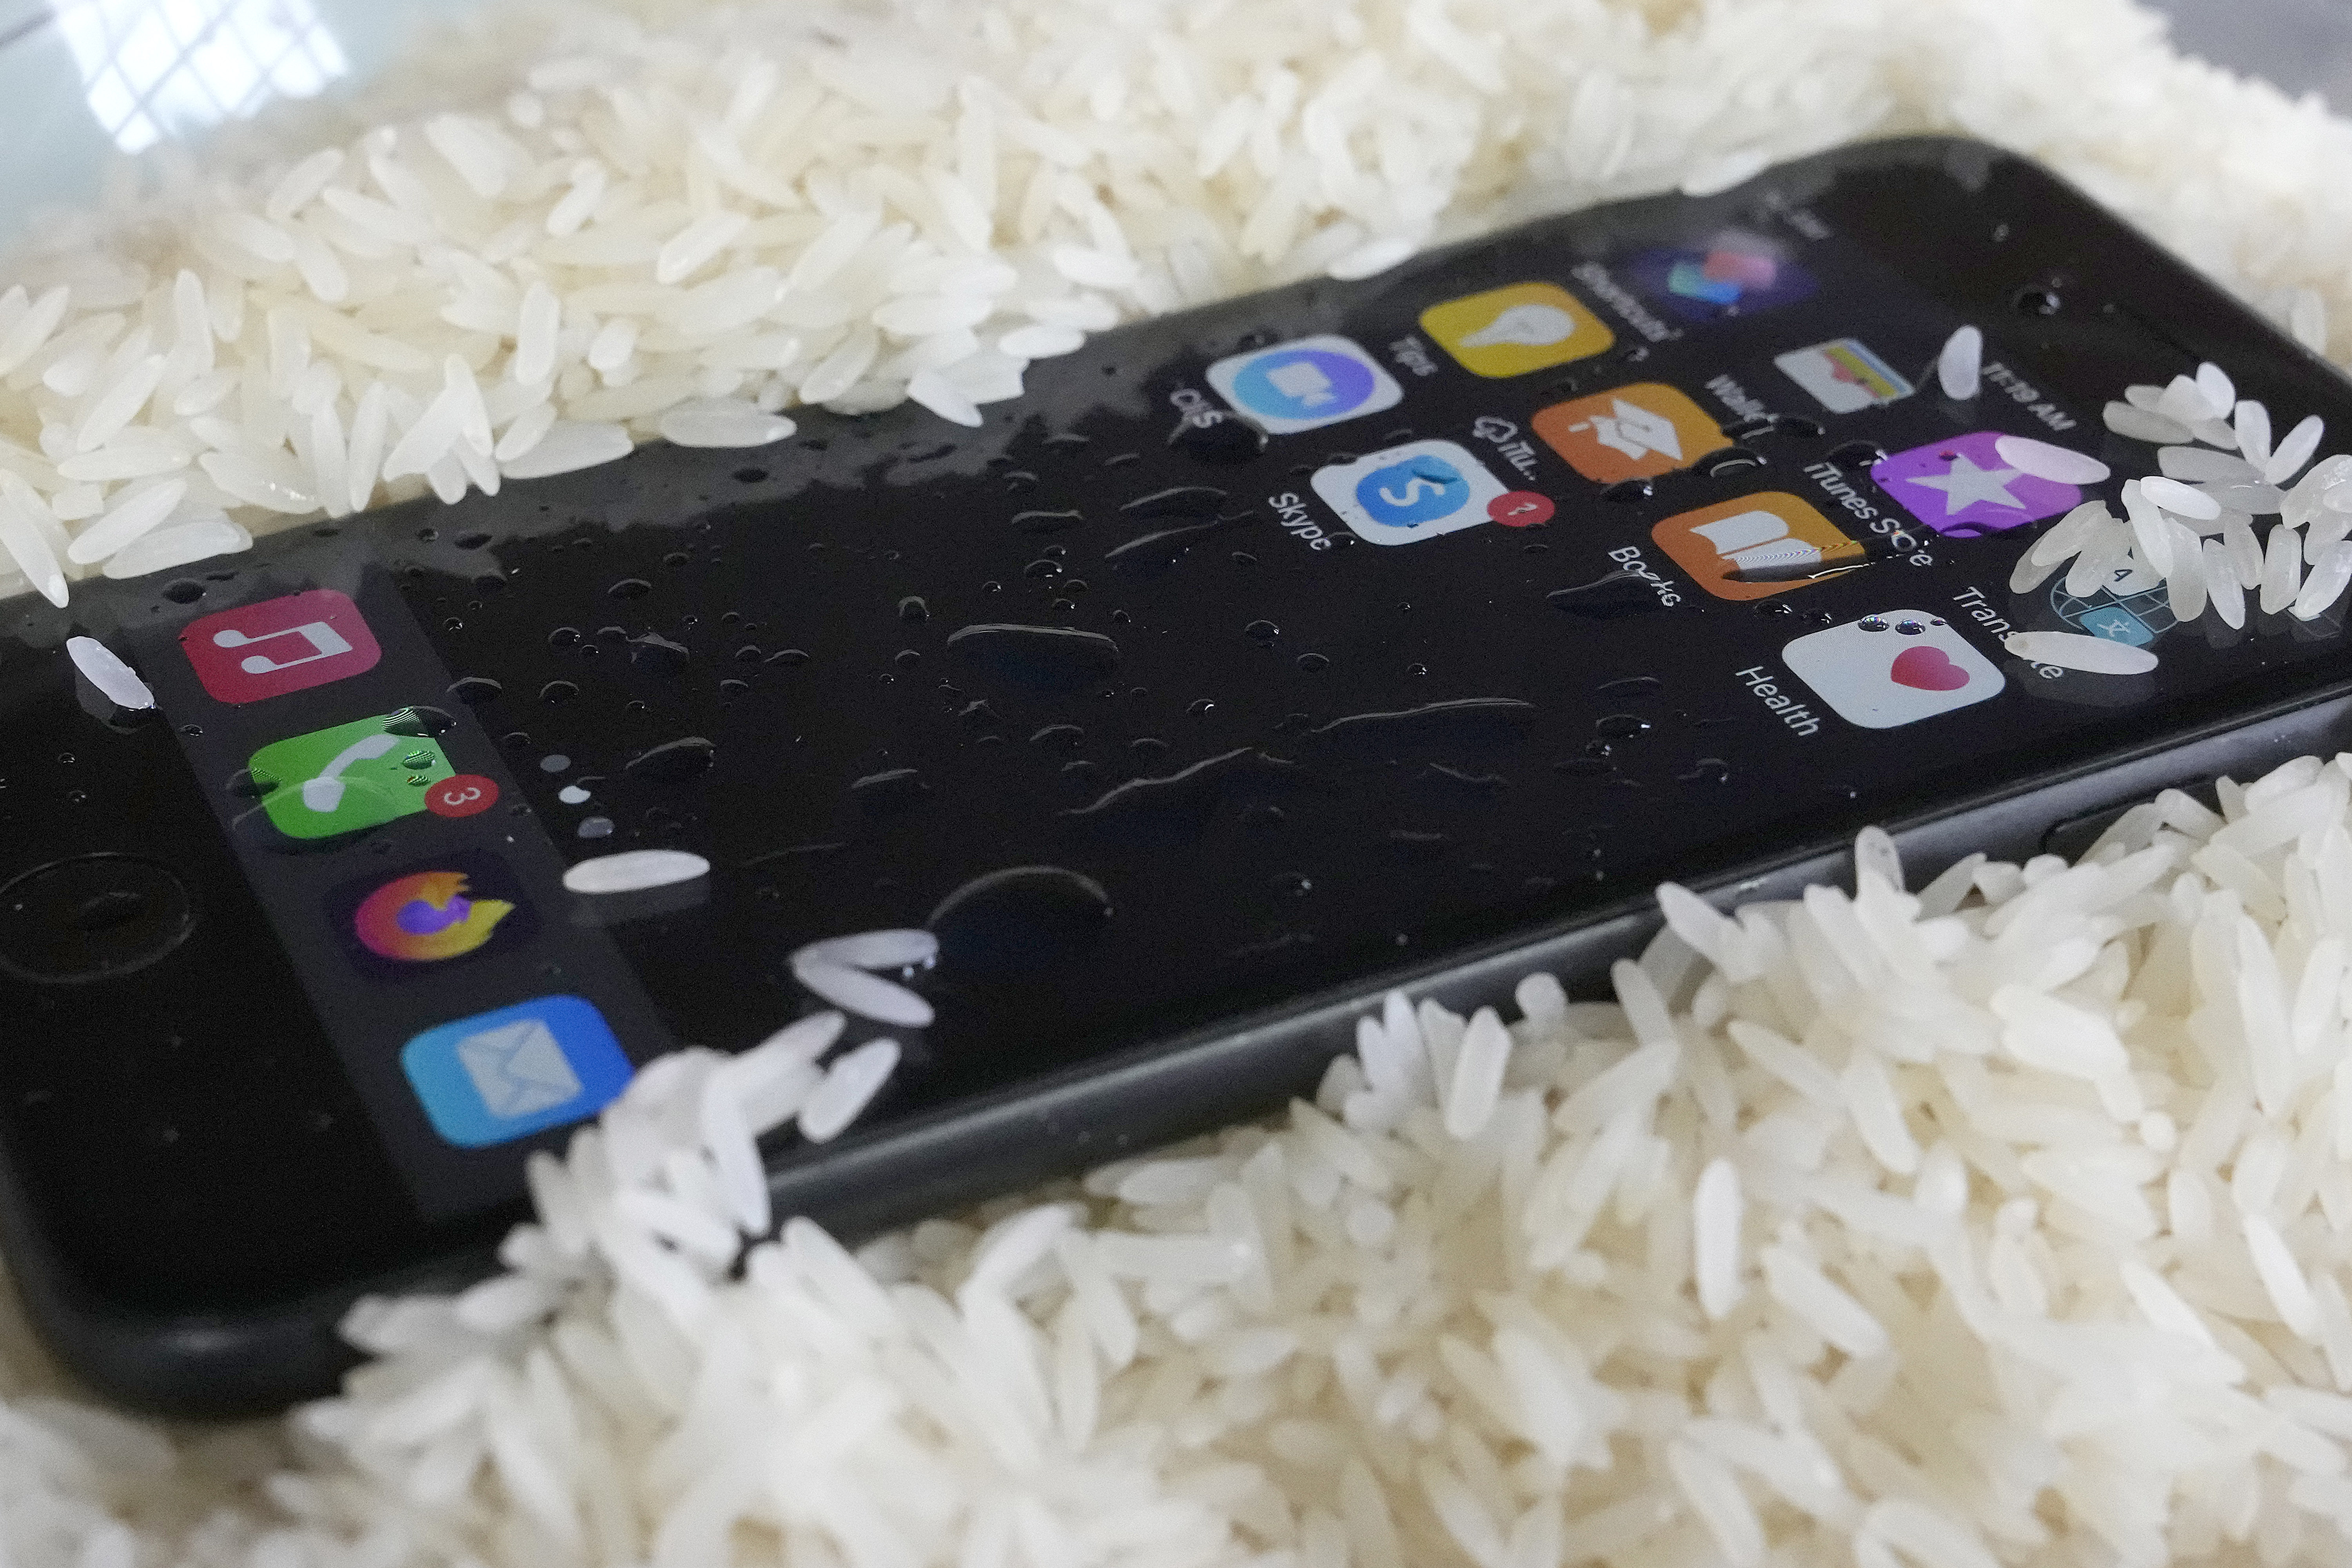 There's a lot of advice on the internet about what to do if you drop your phone in water, some of it conflicting. So what should you do then? Wipe as much moisture off as you can and leave it to dry. Don't use a hair dryer or put on a radiator. But whatever you do, don't dunk your device into a bowl of rice.